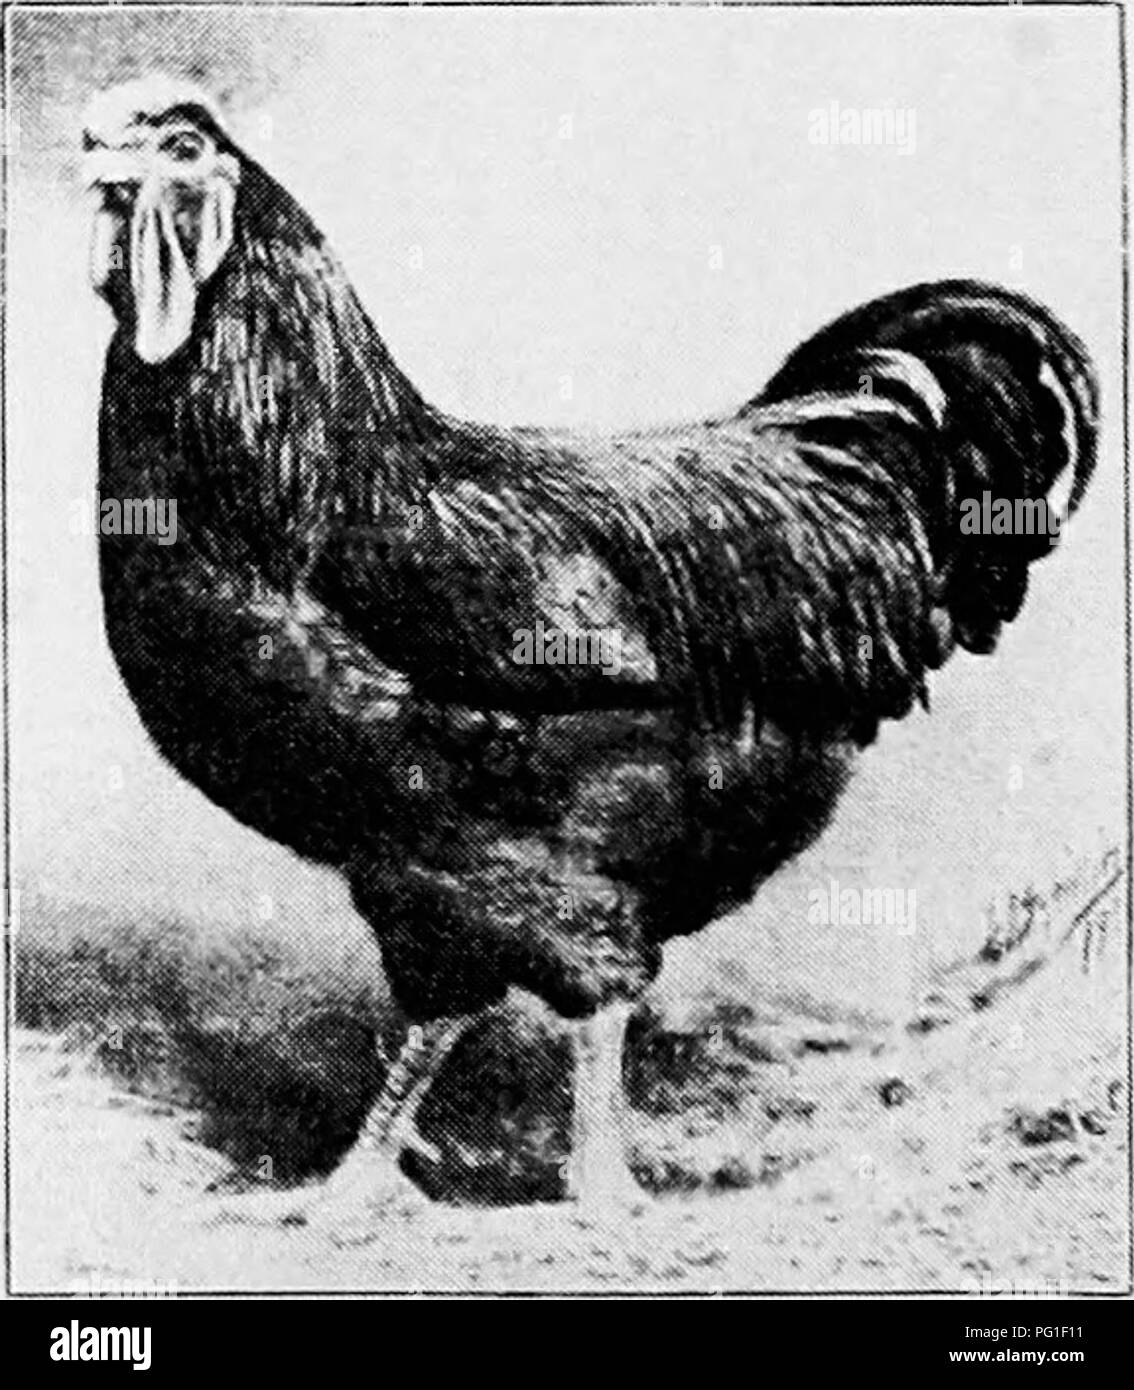 . Principles and practice of poultry culture . Poultry. Fig. 422. Single-Combed Rhode Island Red pullet^ Fig. 423. Single-Combed Rhode Island Red hen of the blood of almost all races that have attracted notice, the red color and the general-purpose type being preserved through it all. As bred on these farms little attention was given, as a rule, to selection for a partic- ular shade or for uniformity of color, though a few stocks were selected with some care as to such points. In size and shape they varied much more than is usual when any form of selec- tion has long been practiced. As has bee Stock Photo